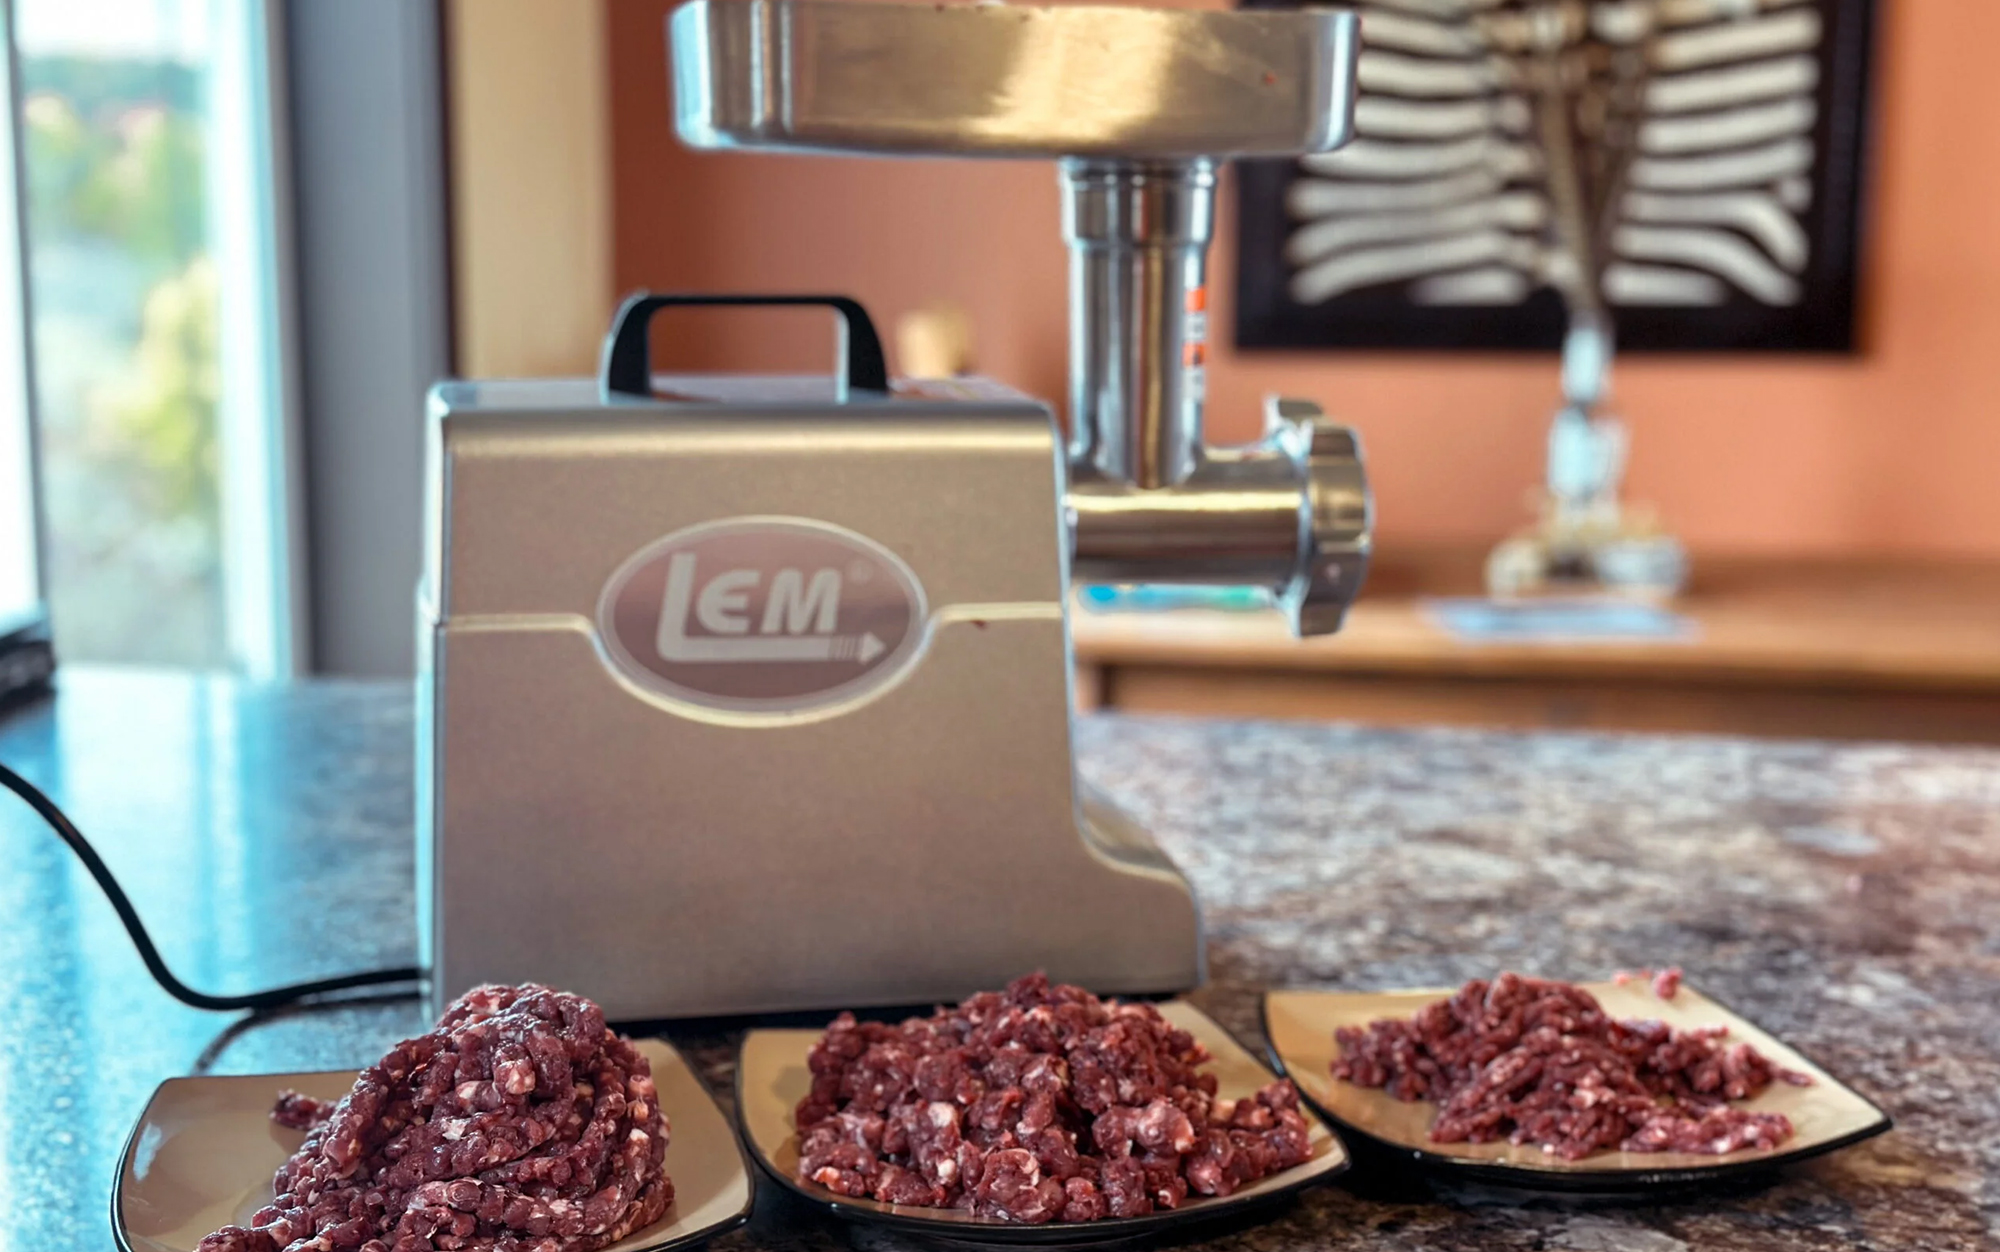 We tested the LEM's three grinder settings.